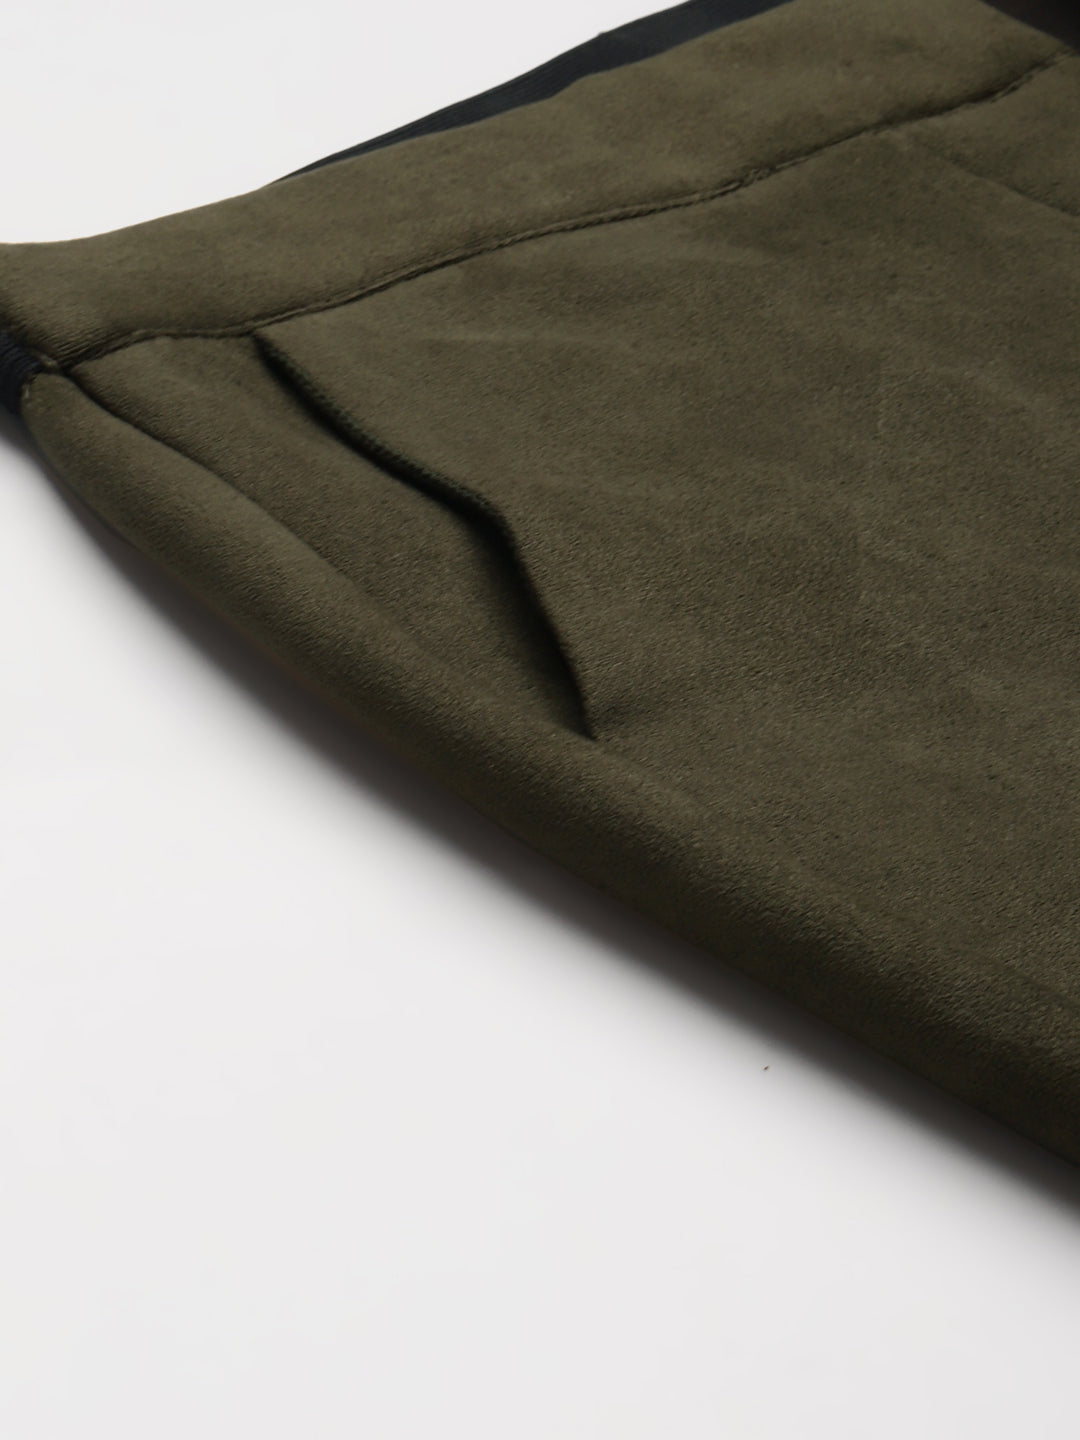 Olive Suede Straight Fit Pants